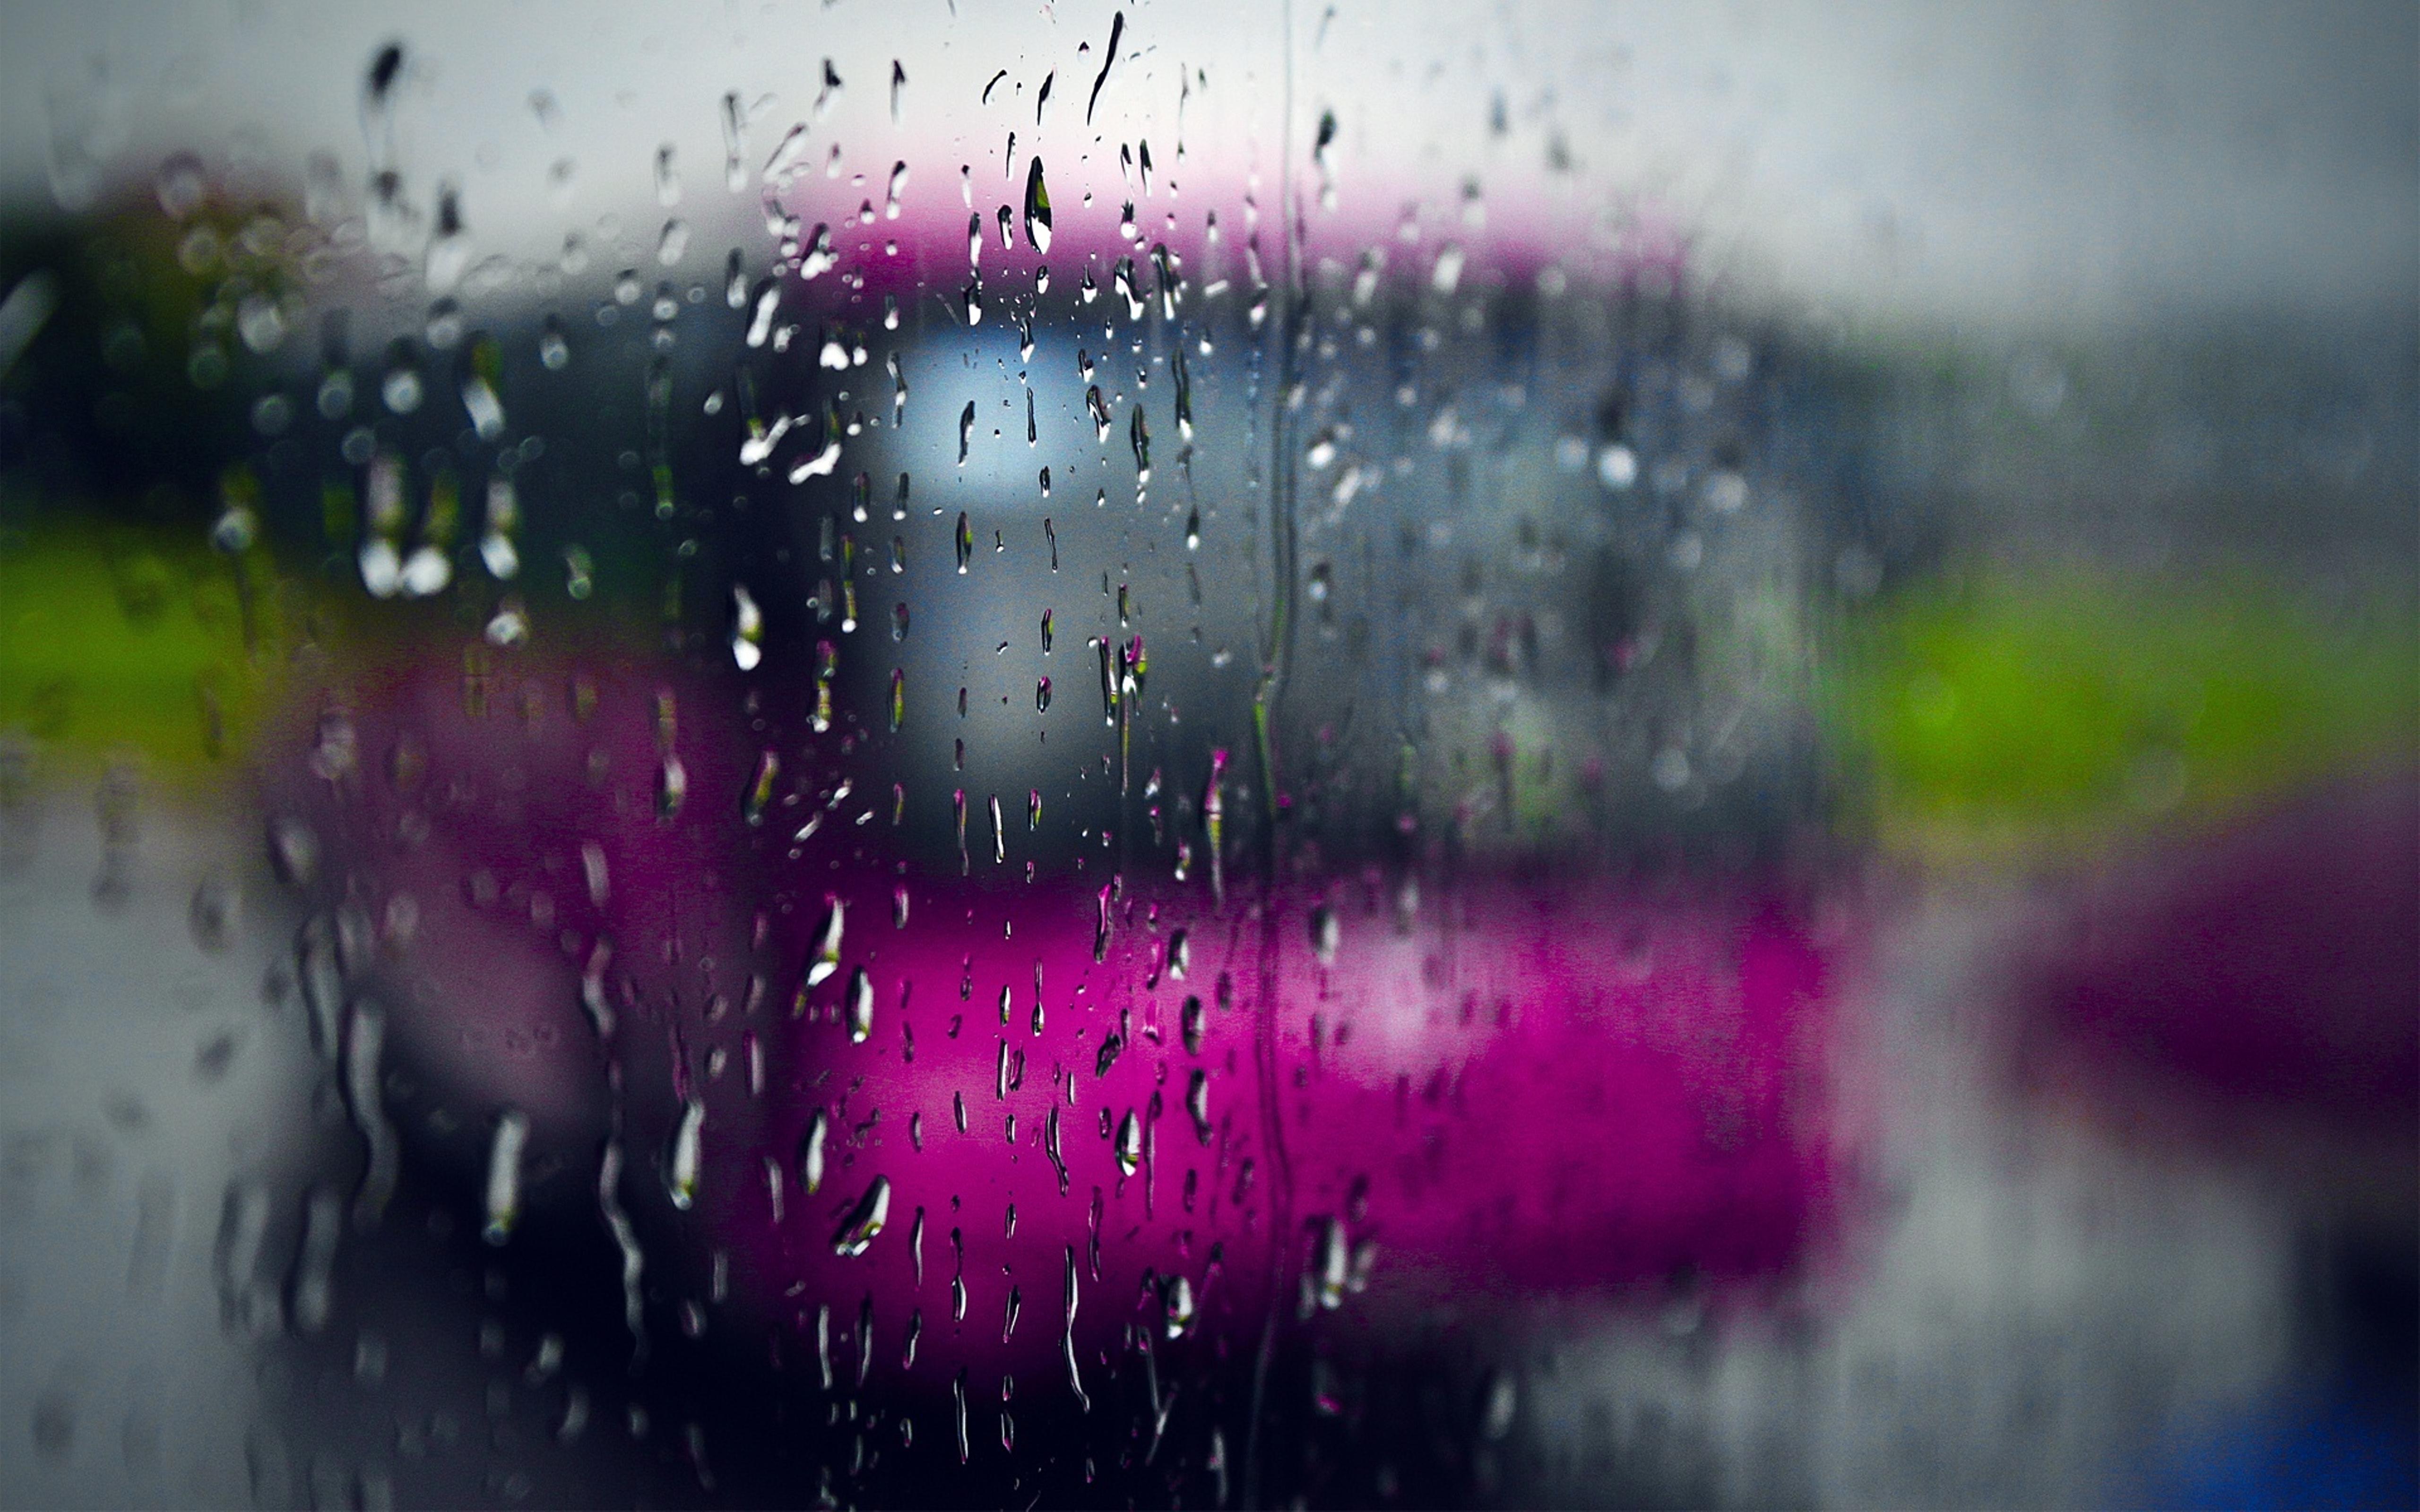 Pink bus in a rainy Autumn day